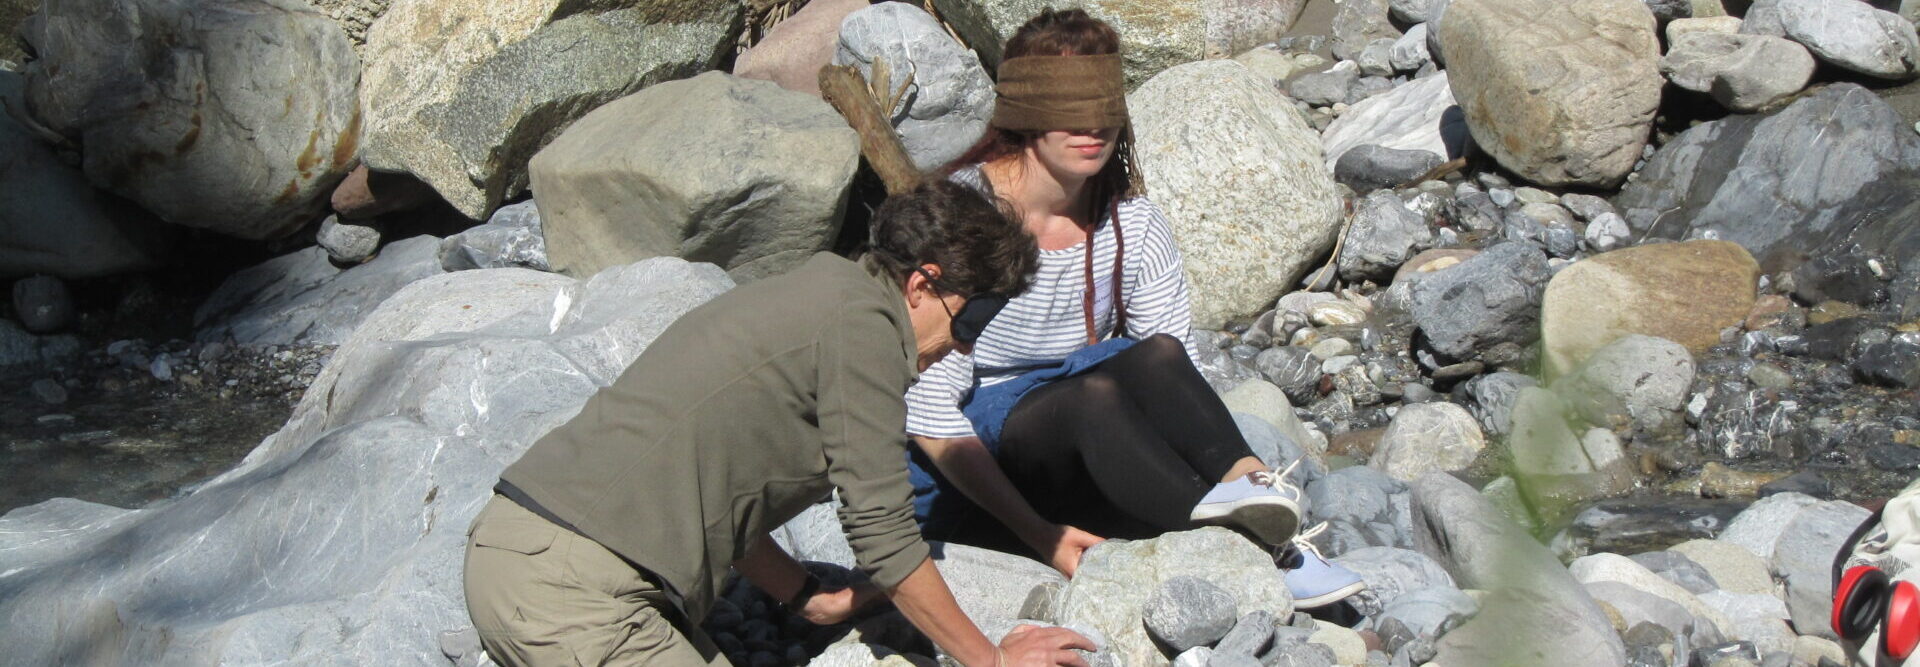 Self-experience in the workshop "Land-Art" in the international congress on "Deafblindness & Self-Expression" in the alpine village Bergün. The two participants explore stones in a stream bed while crouching and sitting blindfolded.